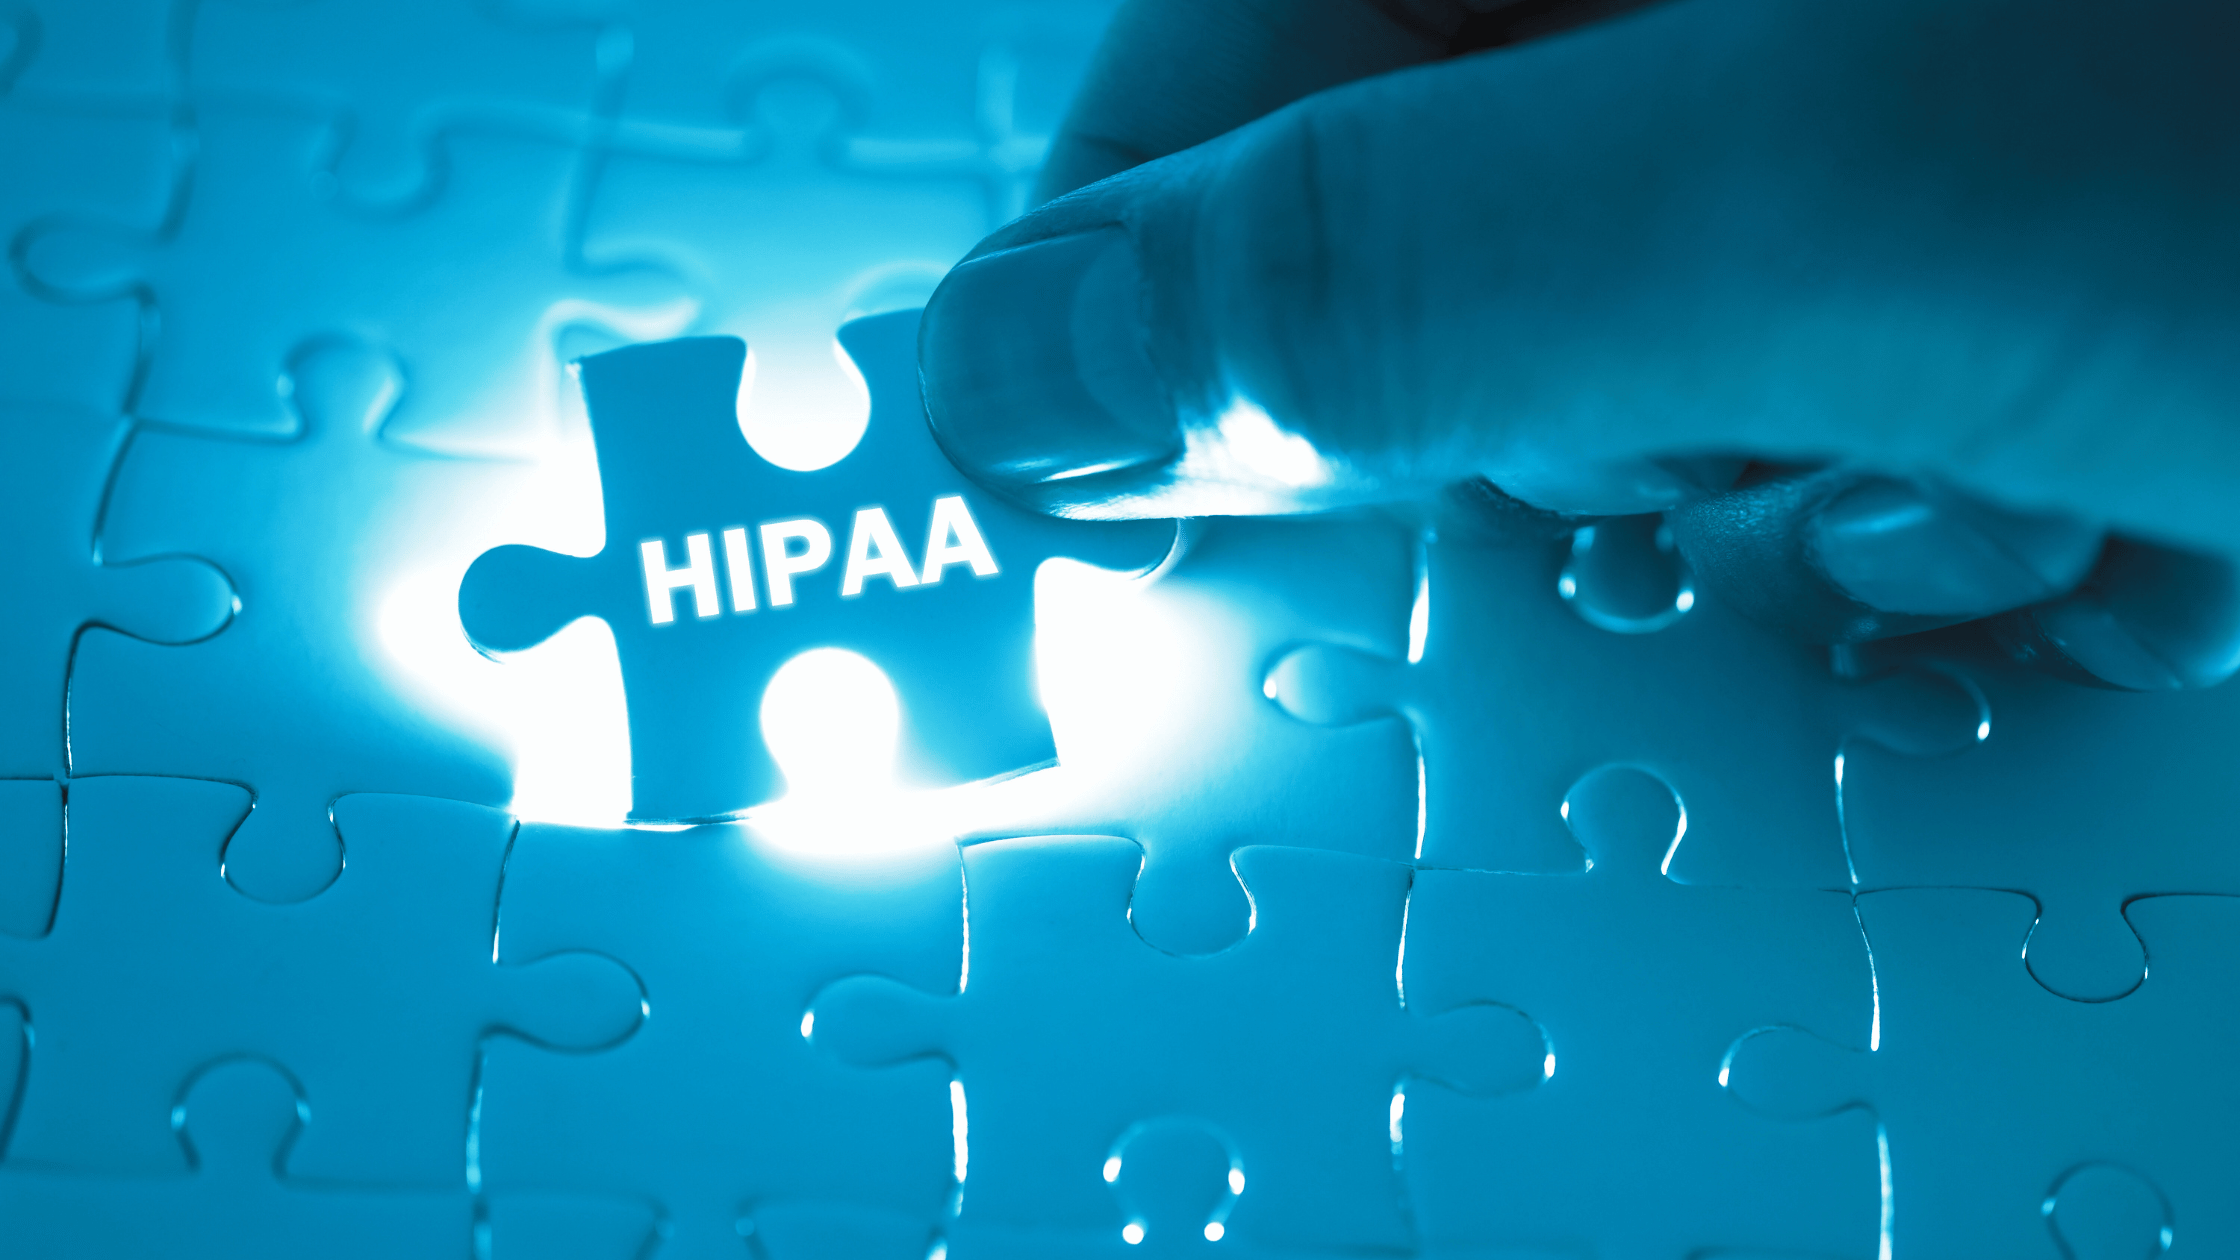 Glowing puzzle pieces with last piece saying "HIPAA"